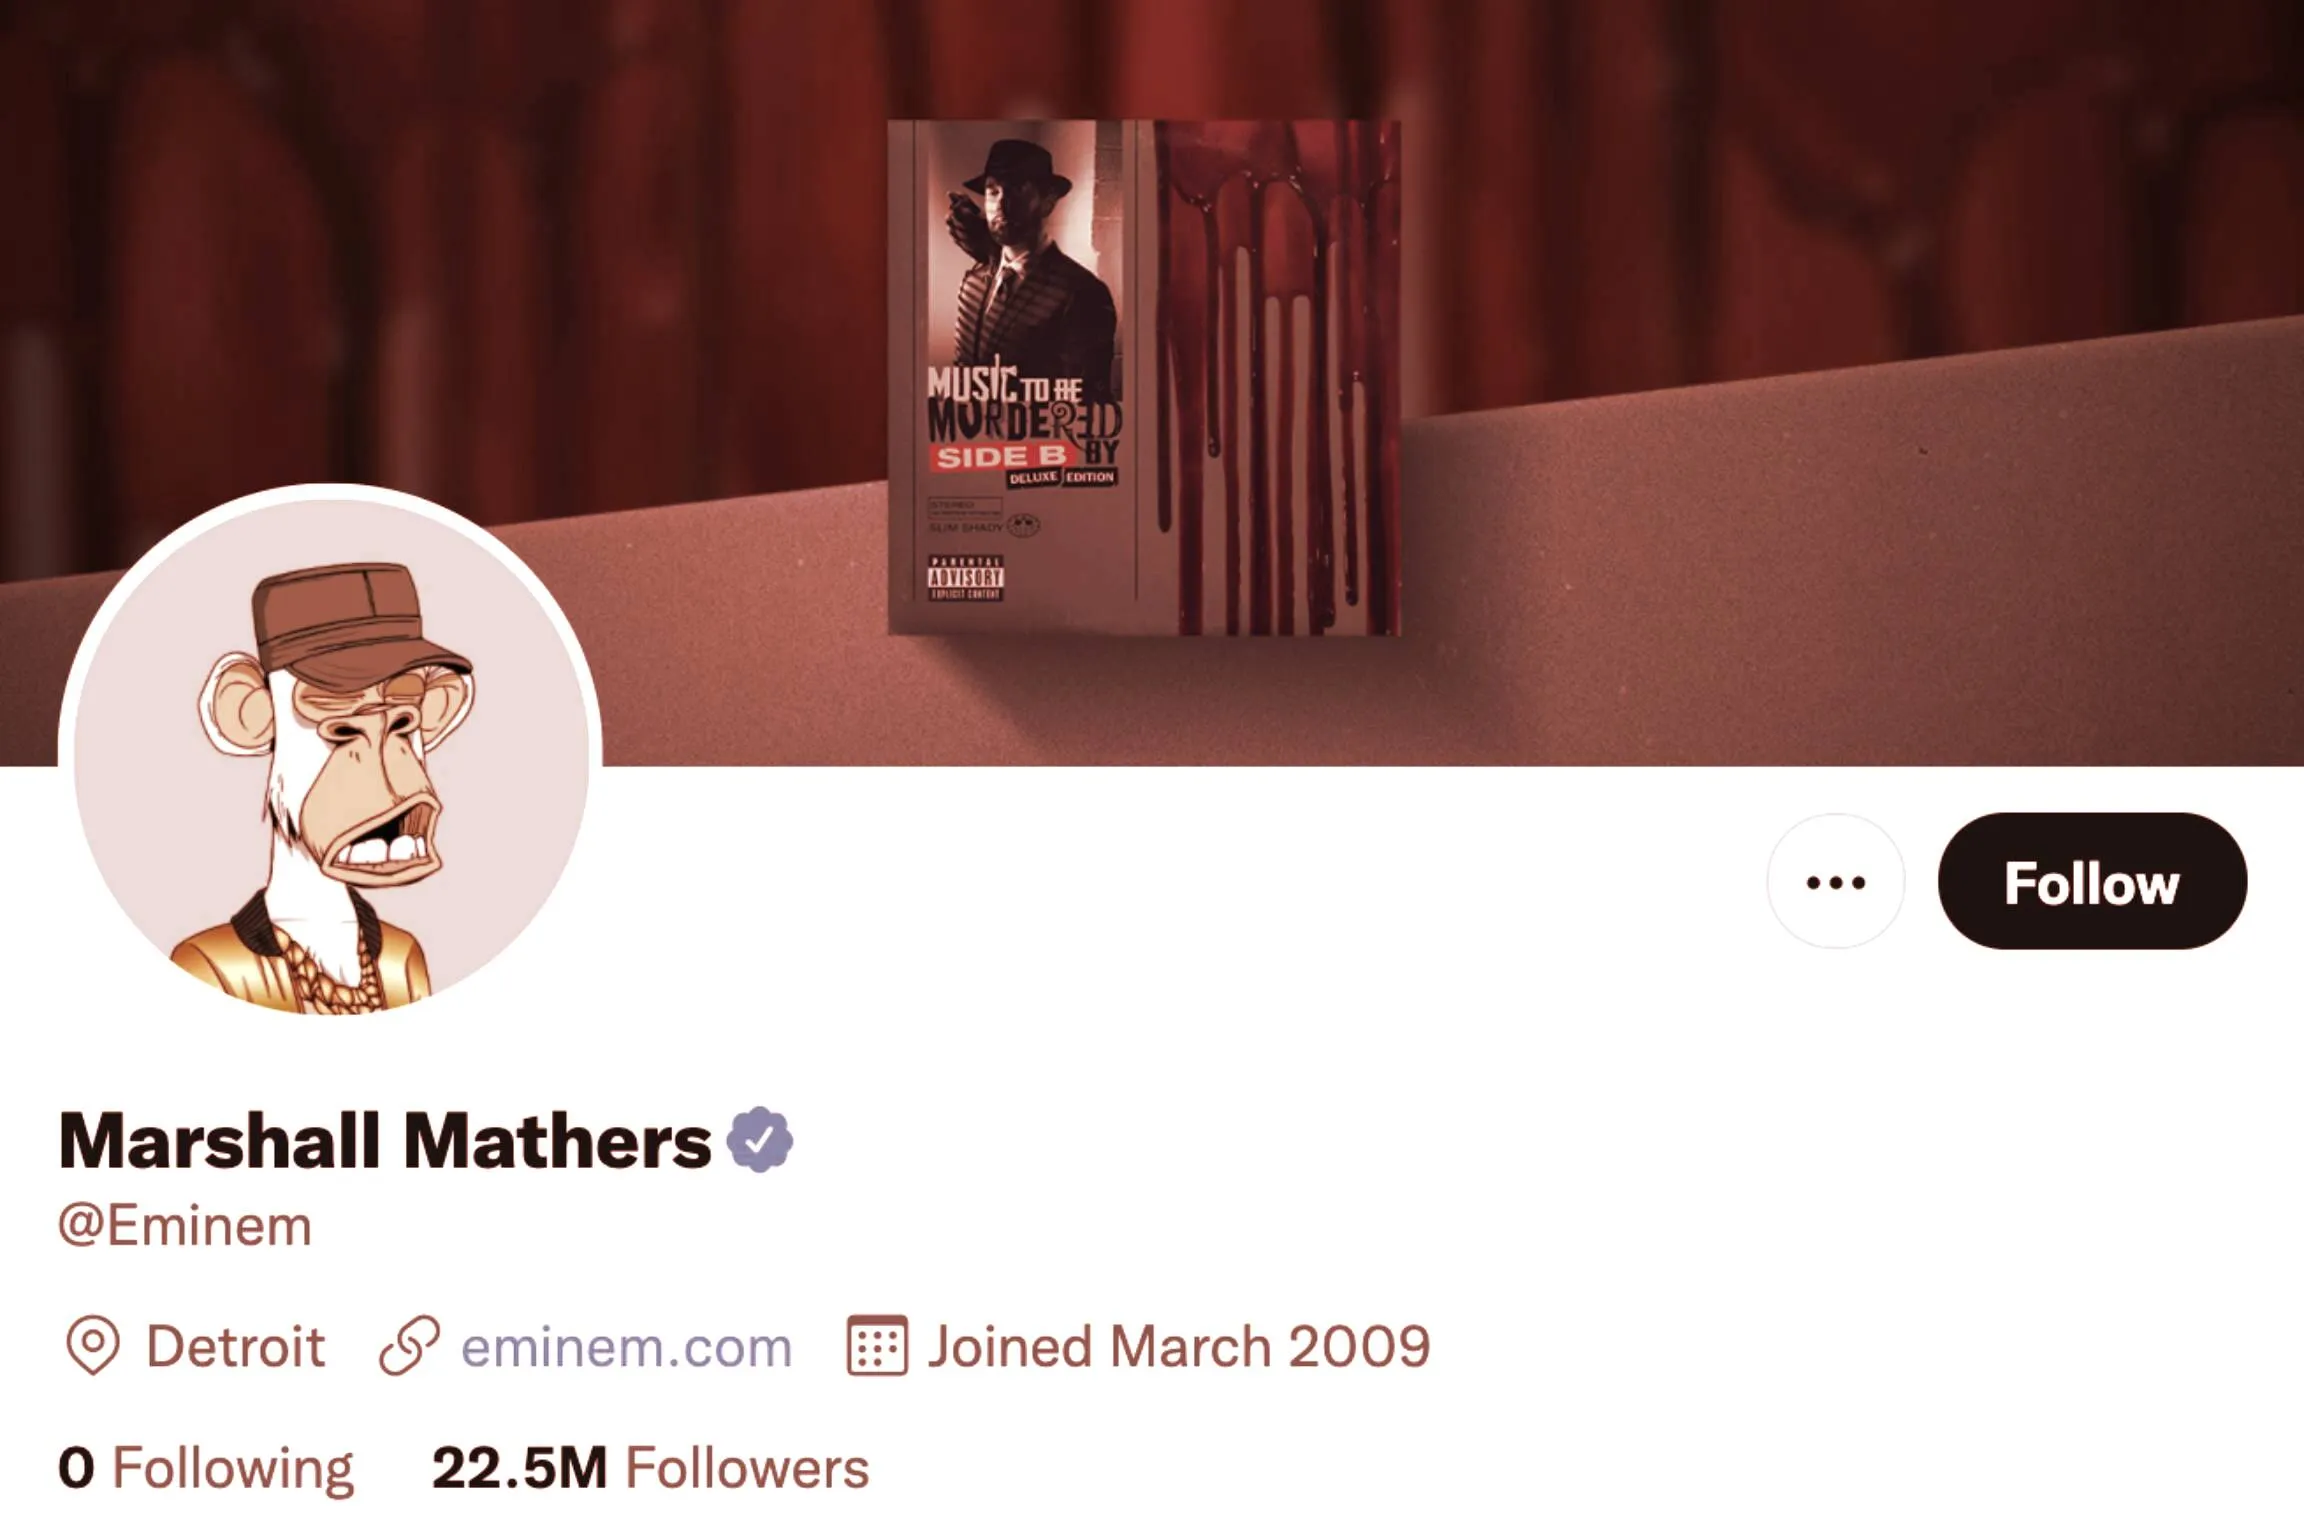 Eminem quickly made his Bored Ape his profile picture on Twitter.